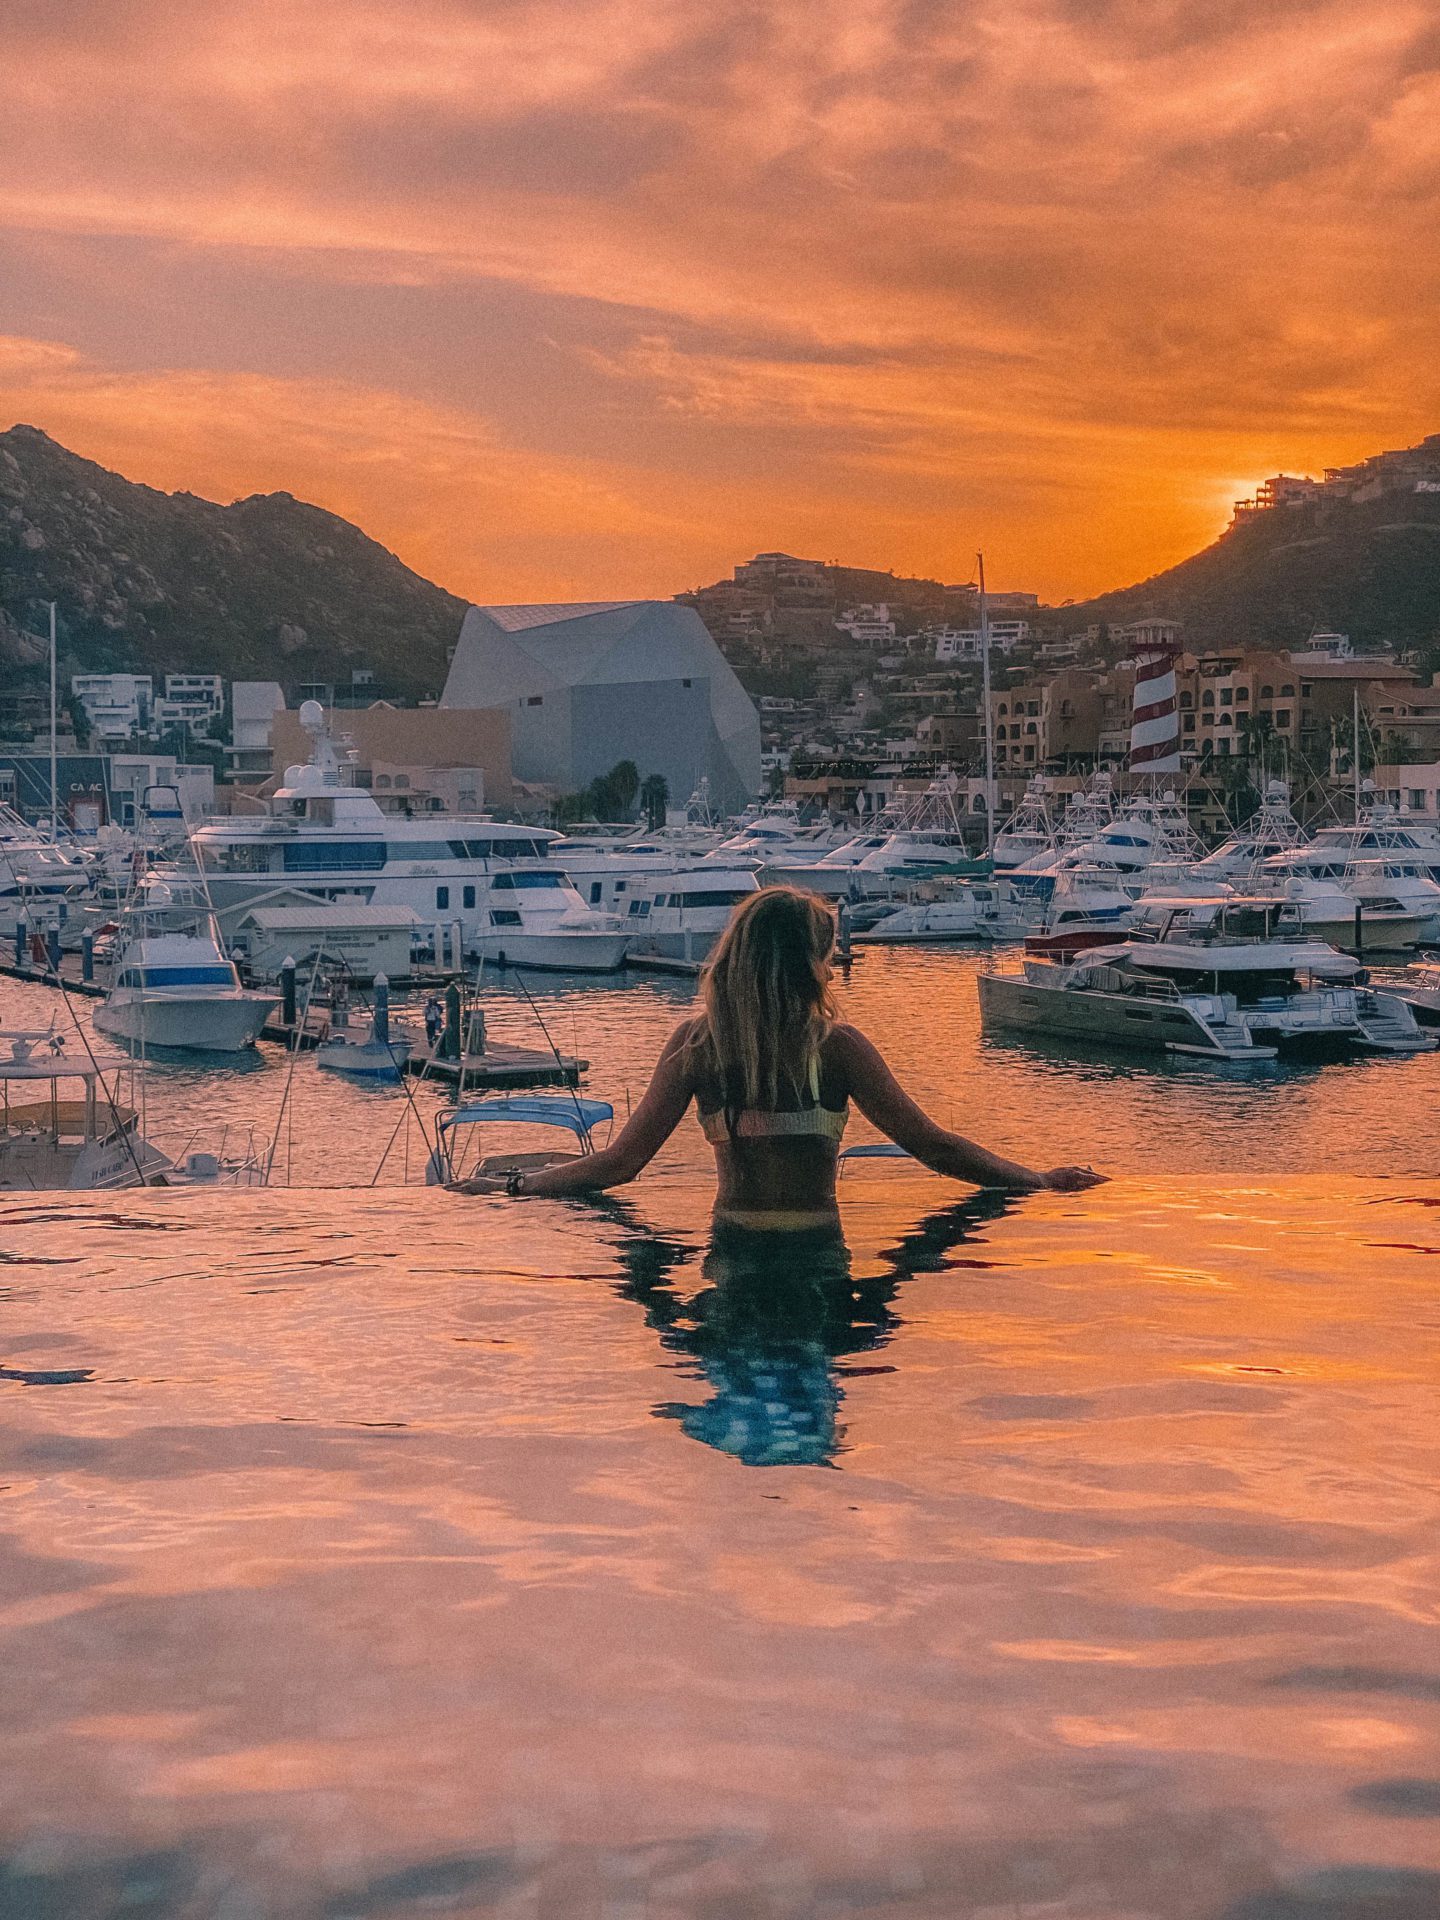 a weekend in Cabo san lucas